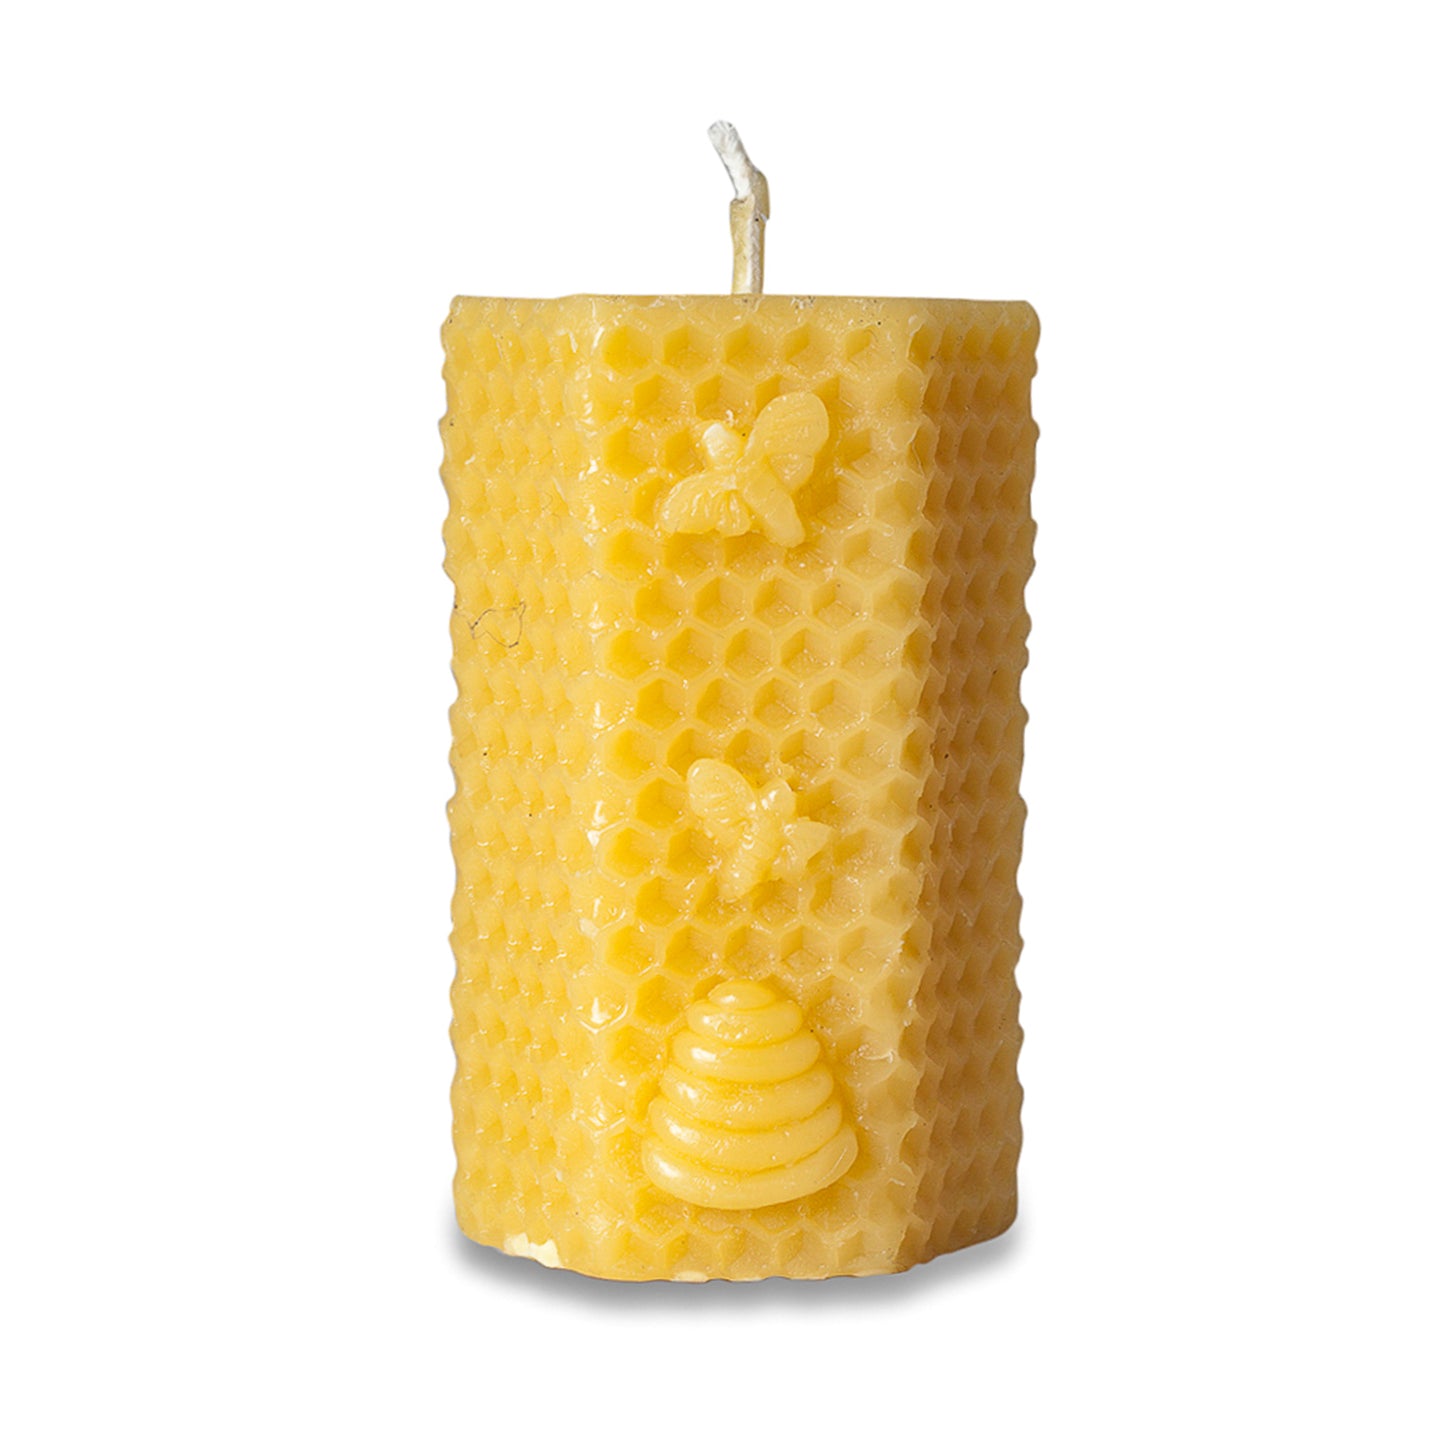 Hexagon, Bees & Hive Candle